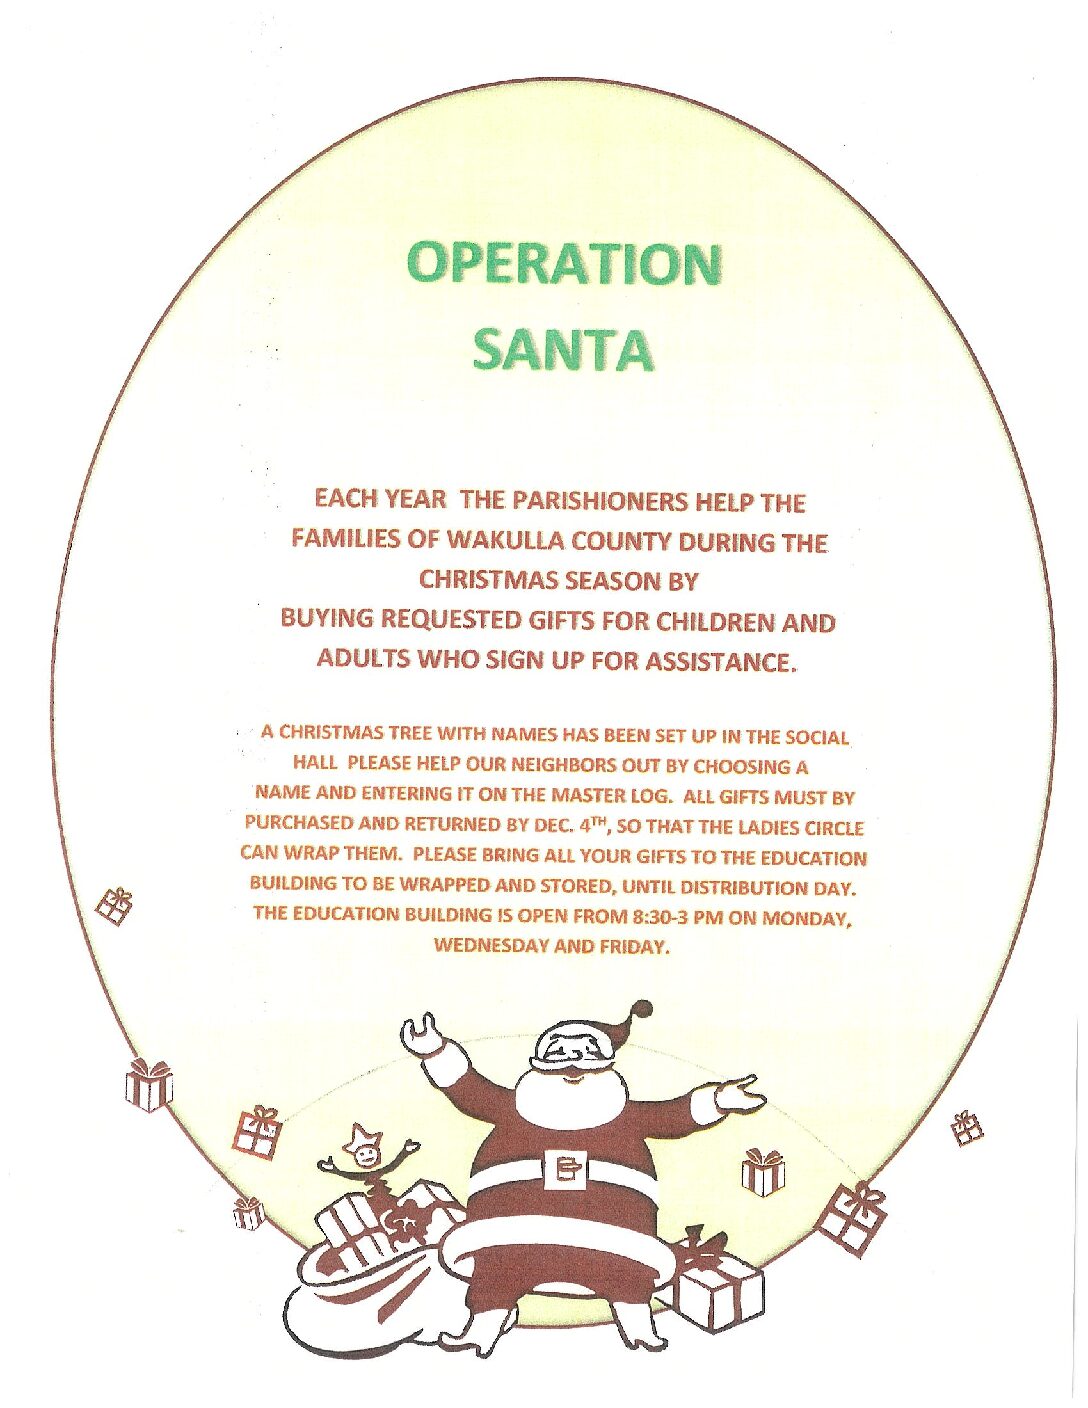 Please adopt a child or adult for Operation Santa this season